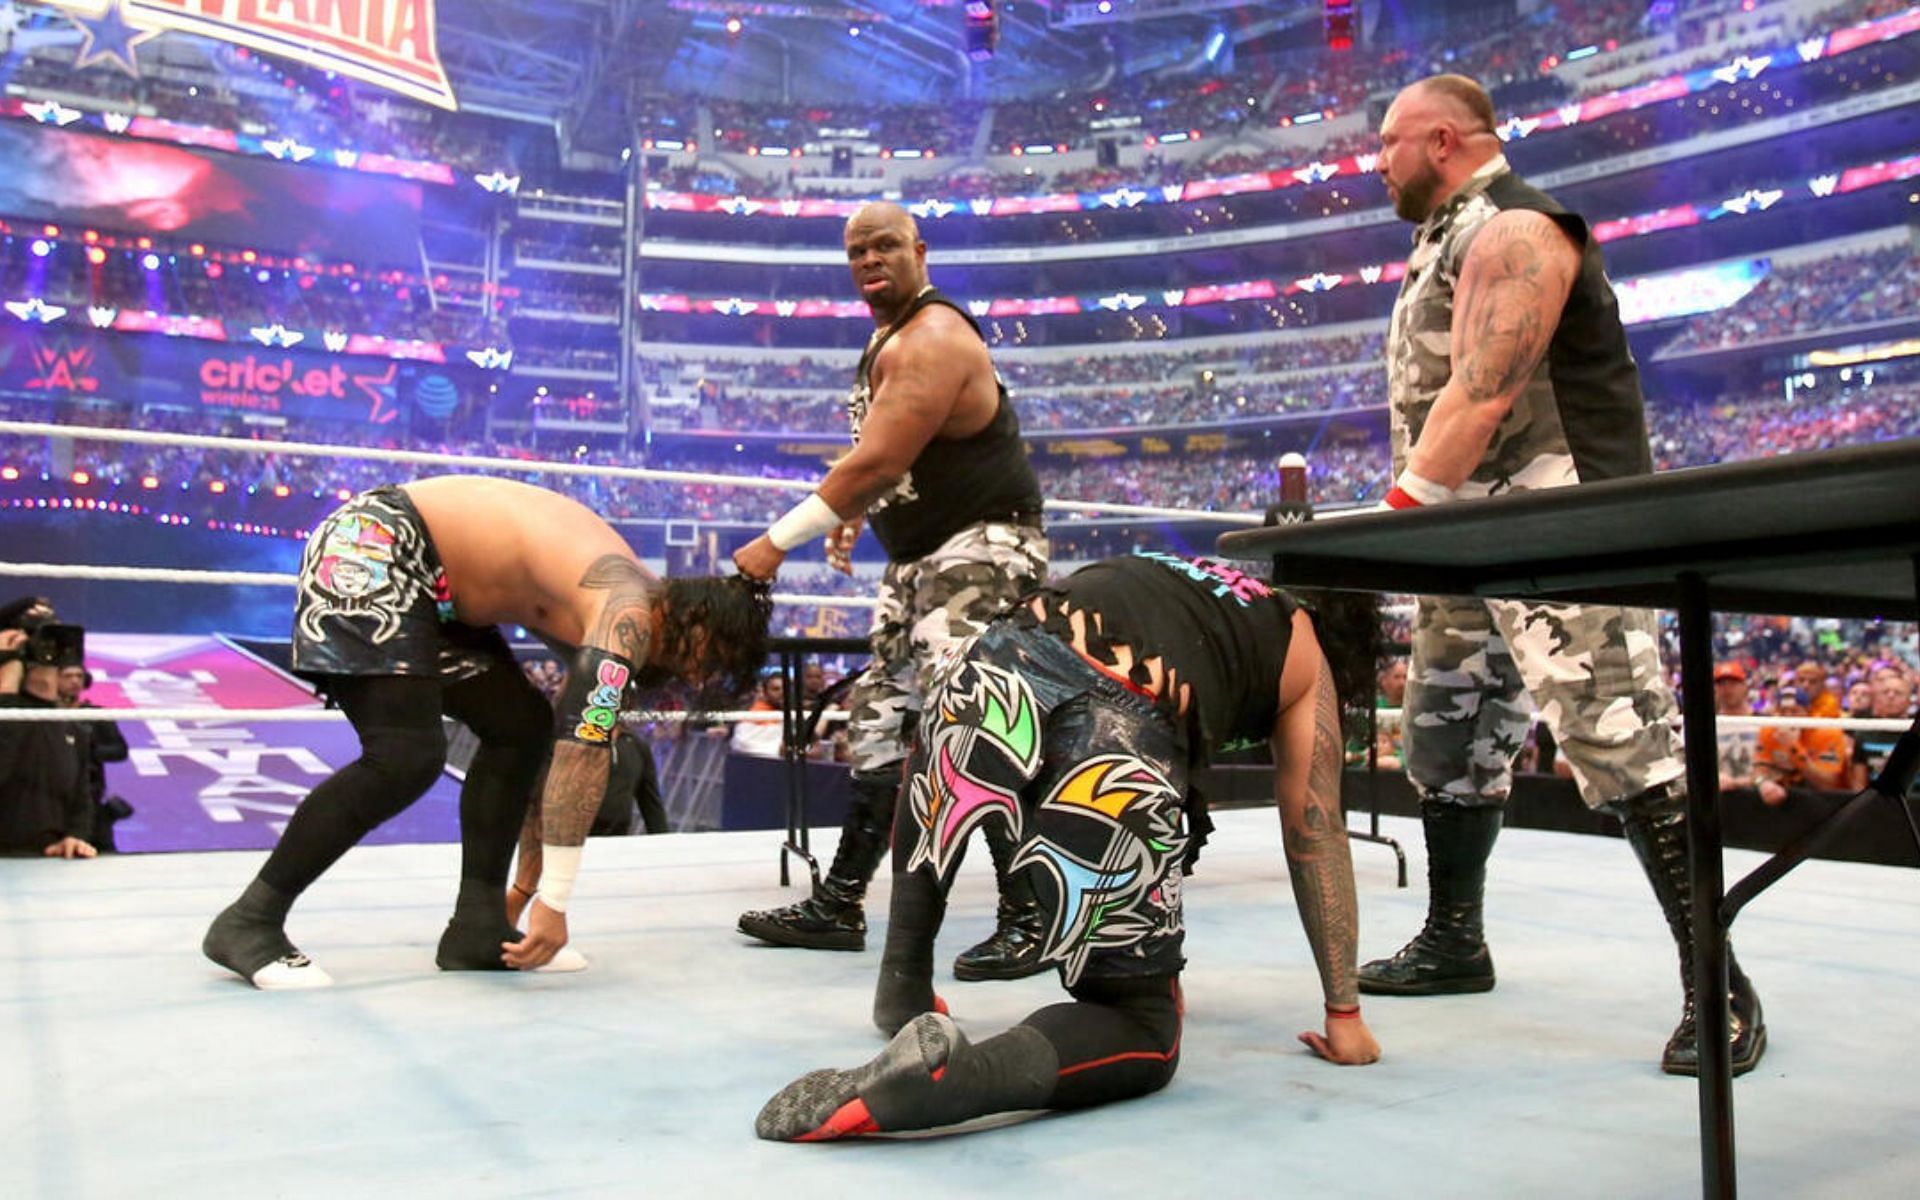 The Dudley Boyz are one of the greatest tag teams in WWE history!